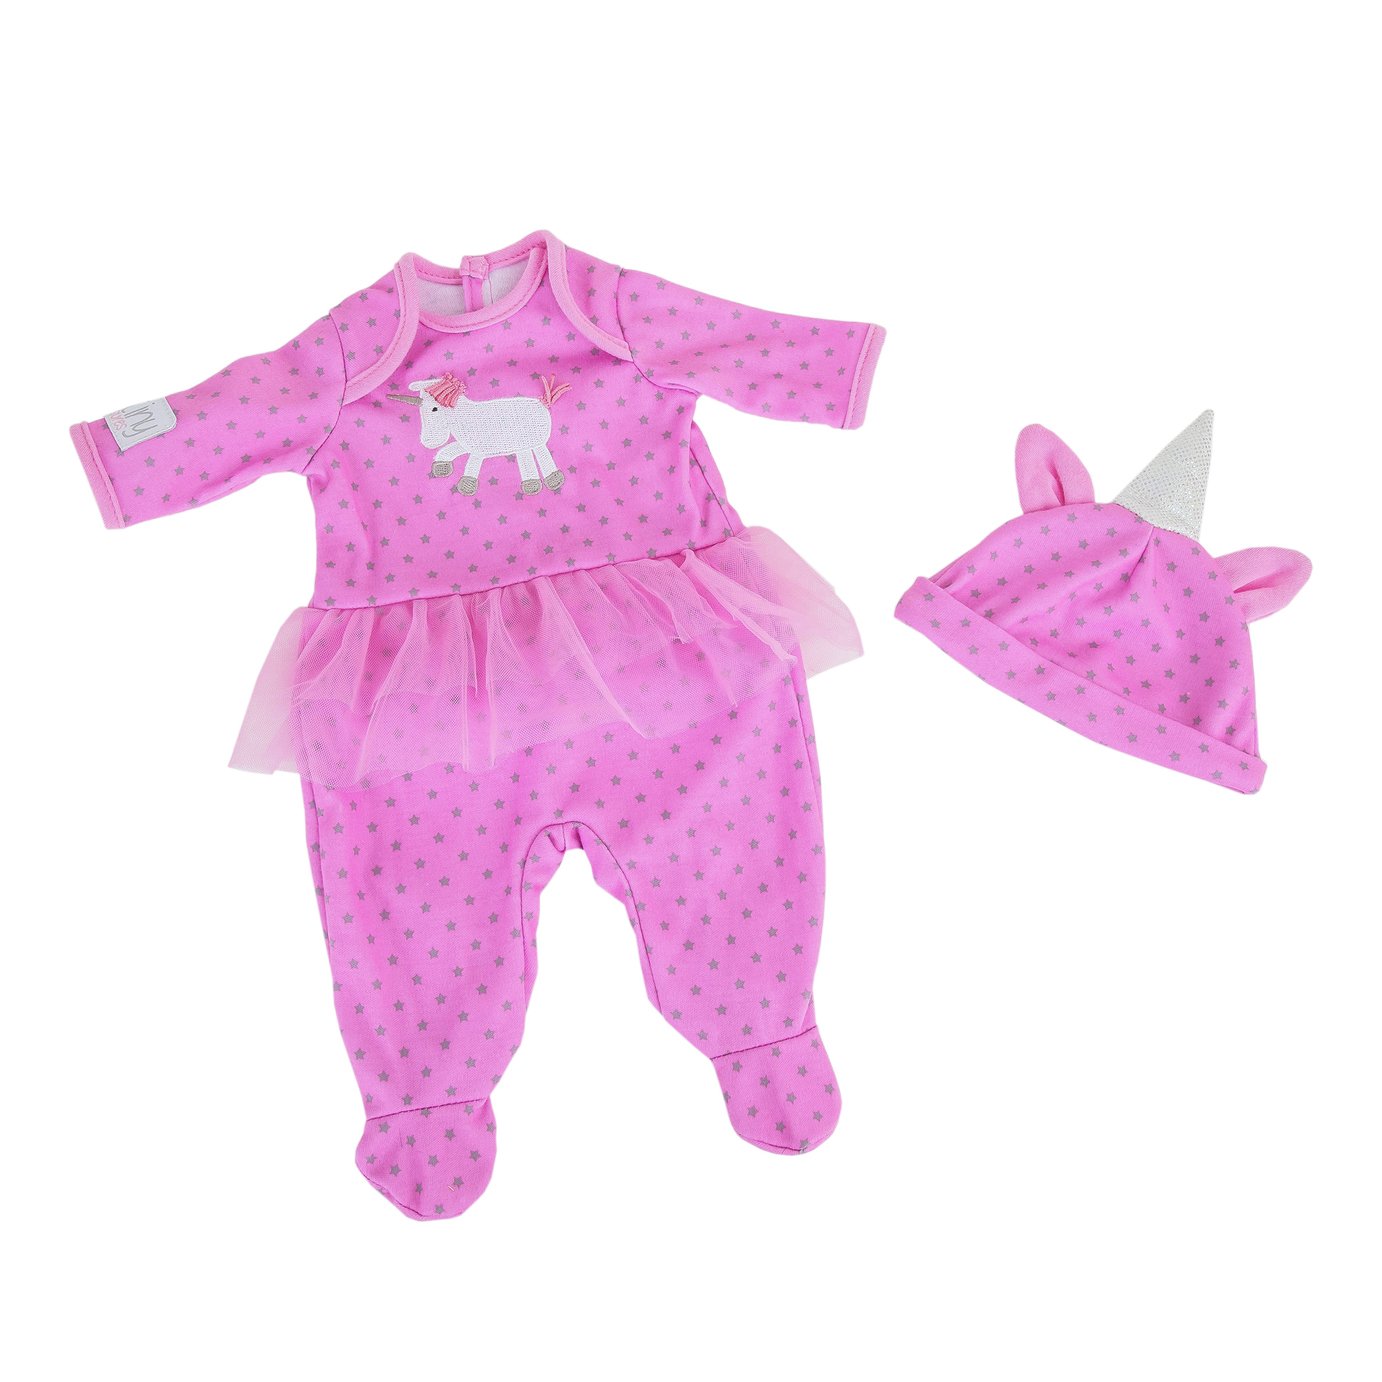 chad valley tiny treasures baby doll with pink outfit & hat